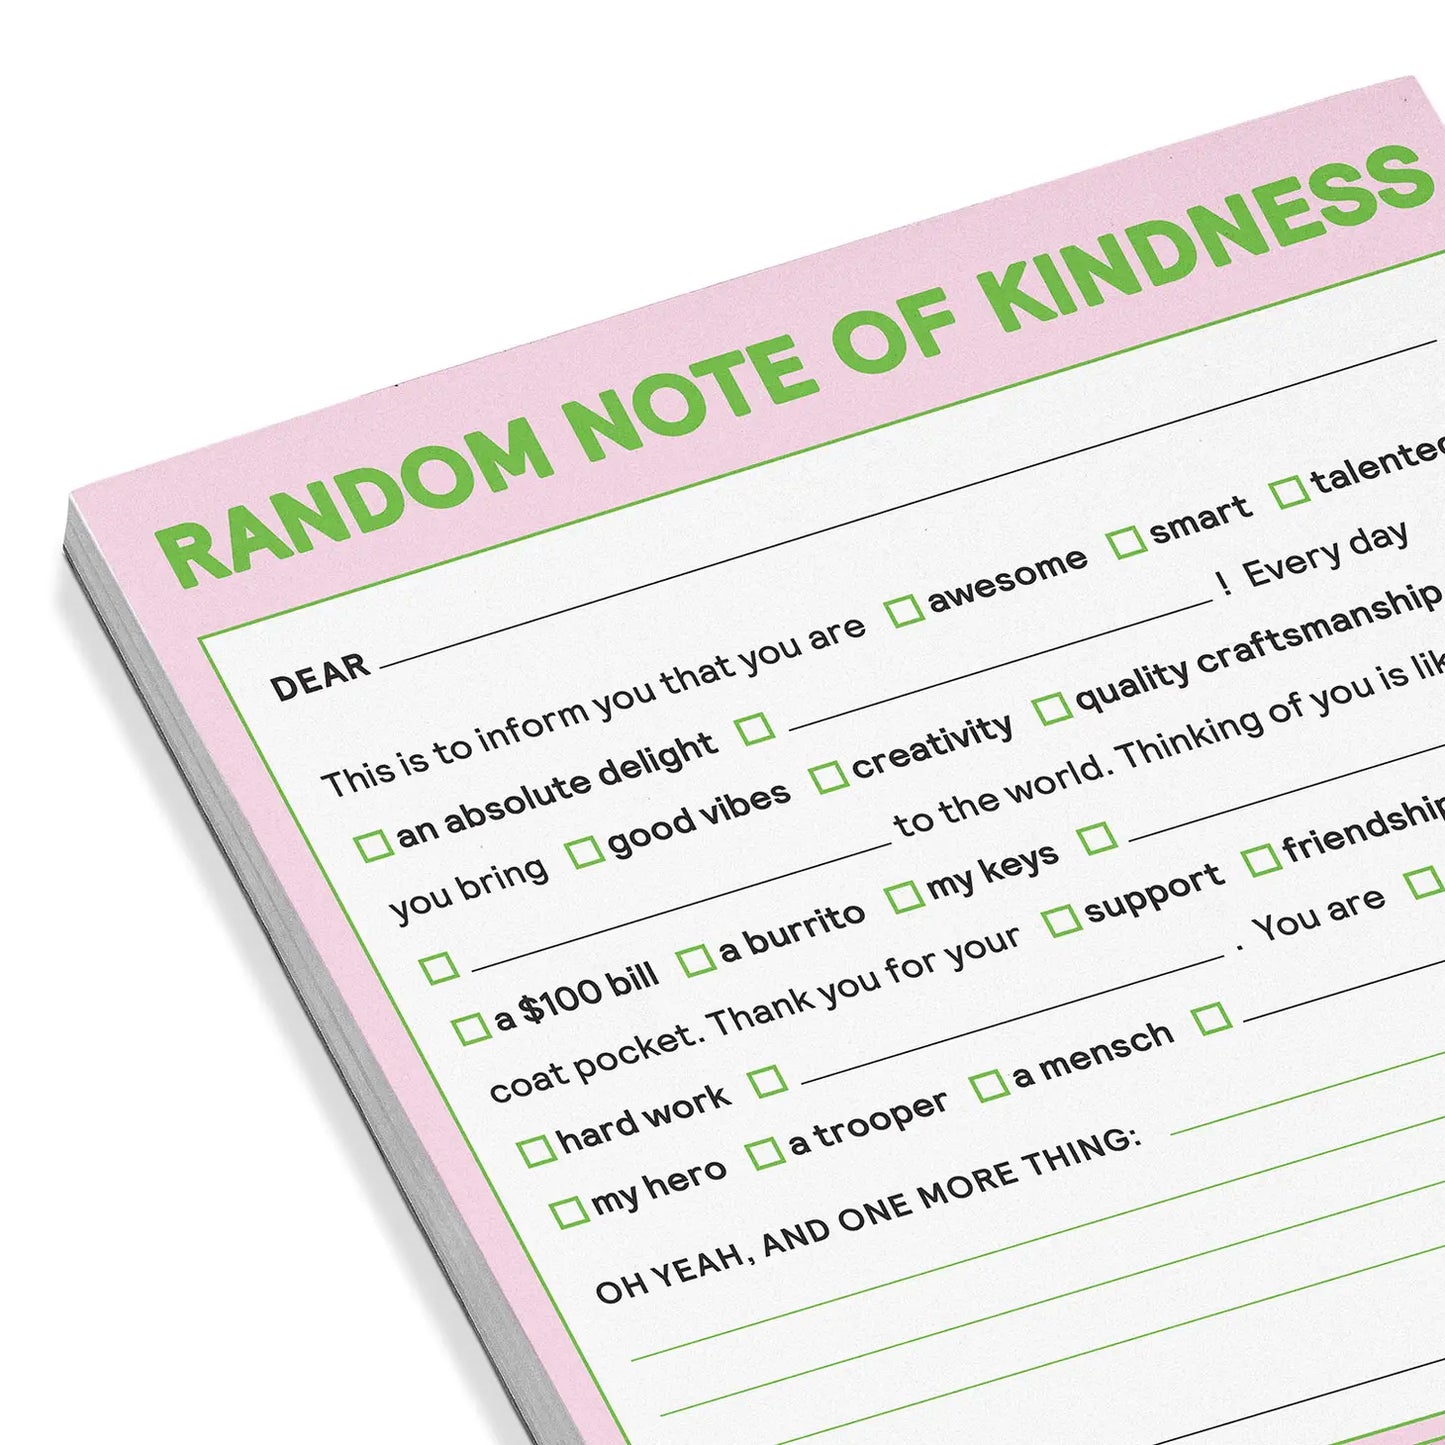 Random Note of Kindness Nifty Note Pad -50 Sheets